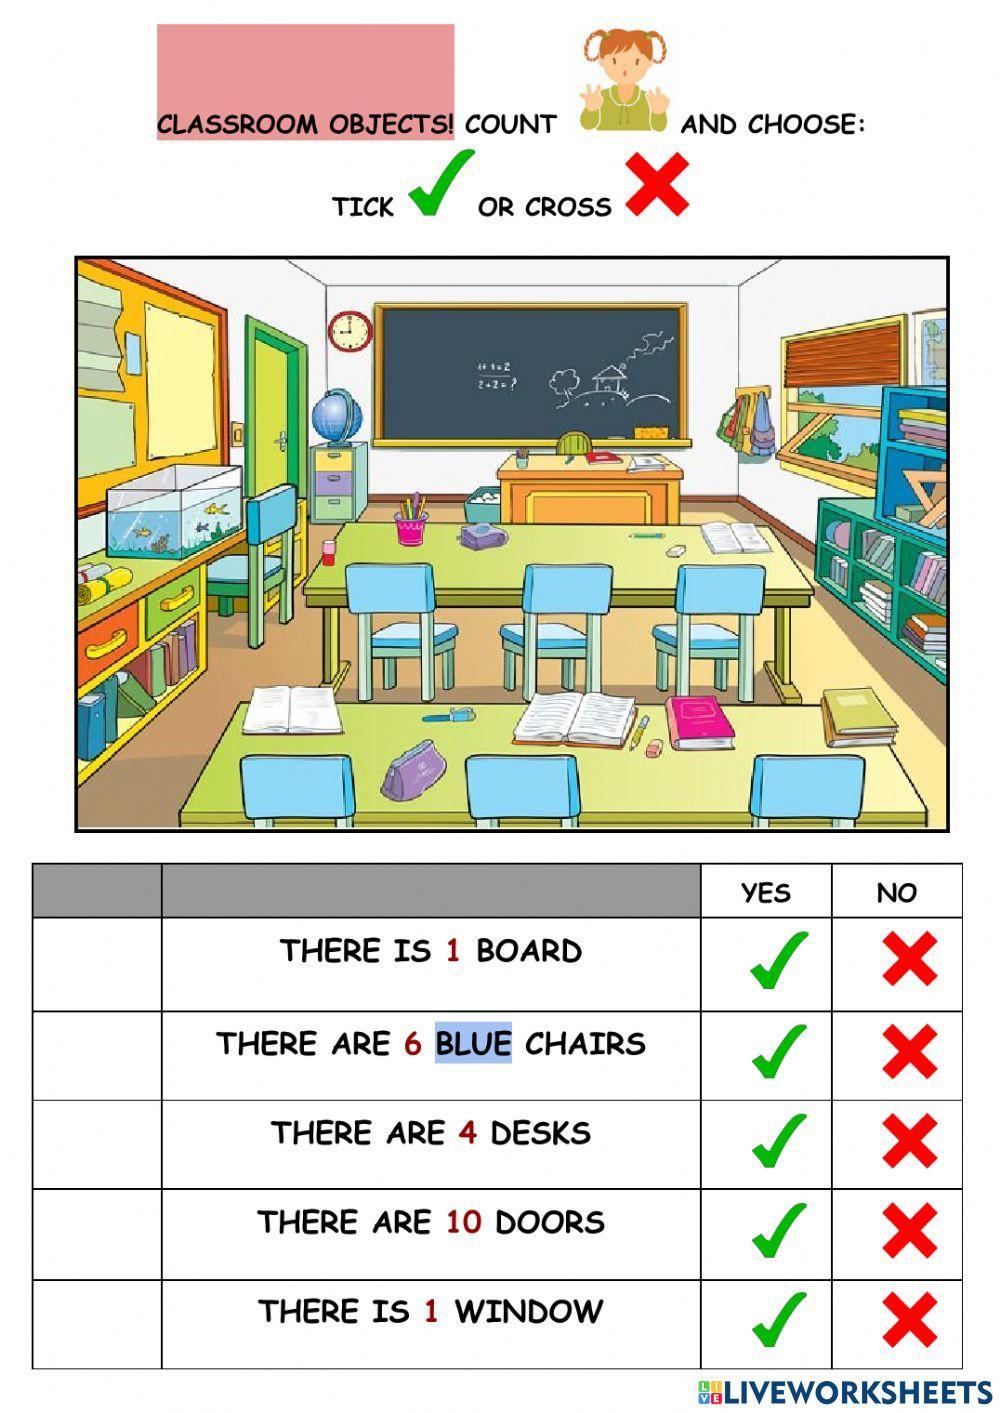 Classroom objects and furniture